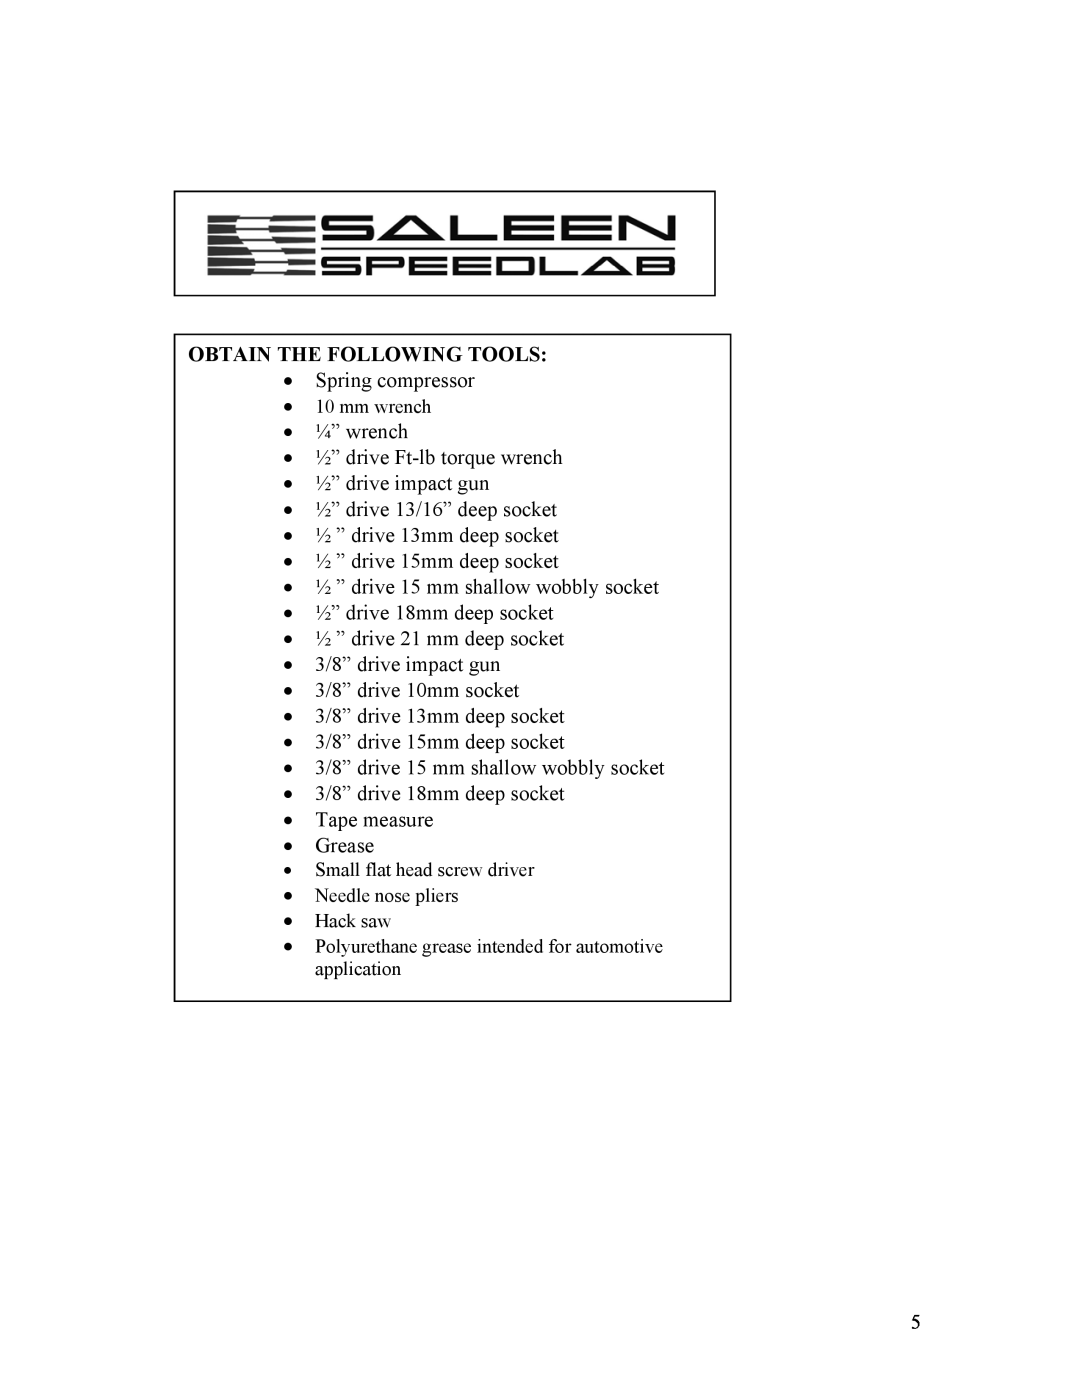 Saleen 10-8002-C11790A installation manual Obtain The Following Tools 